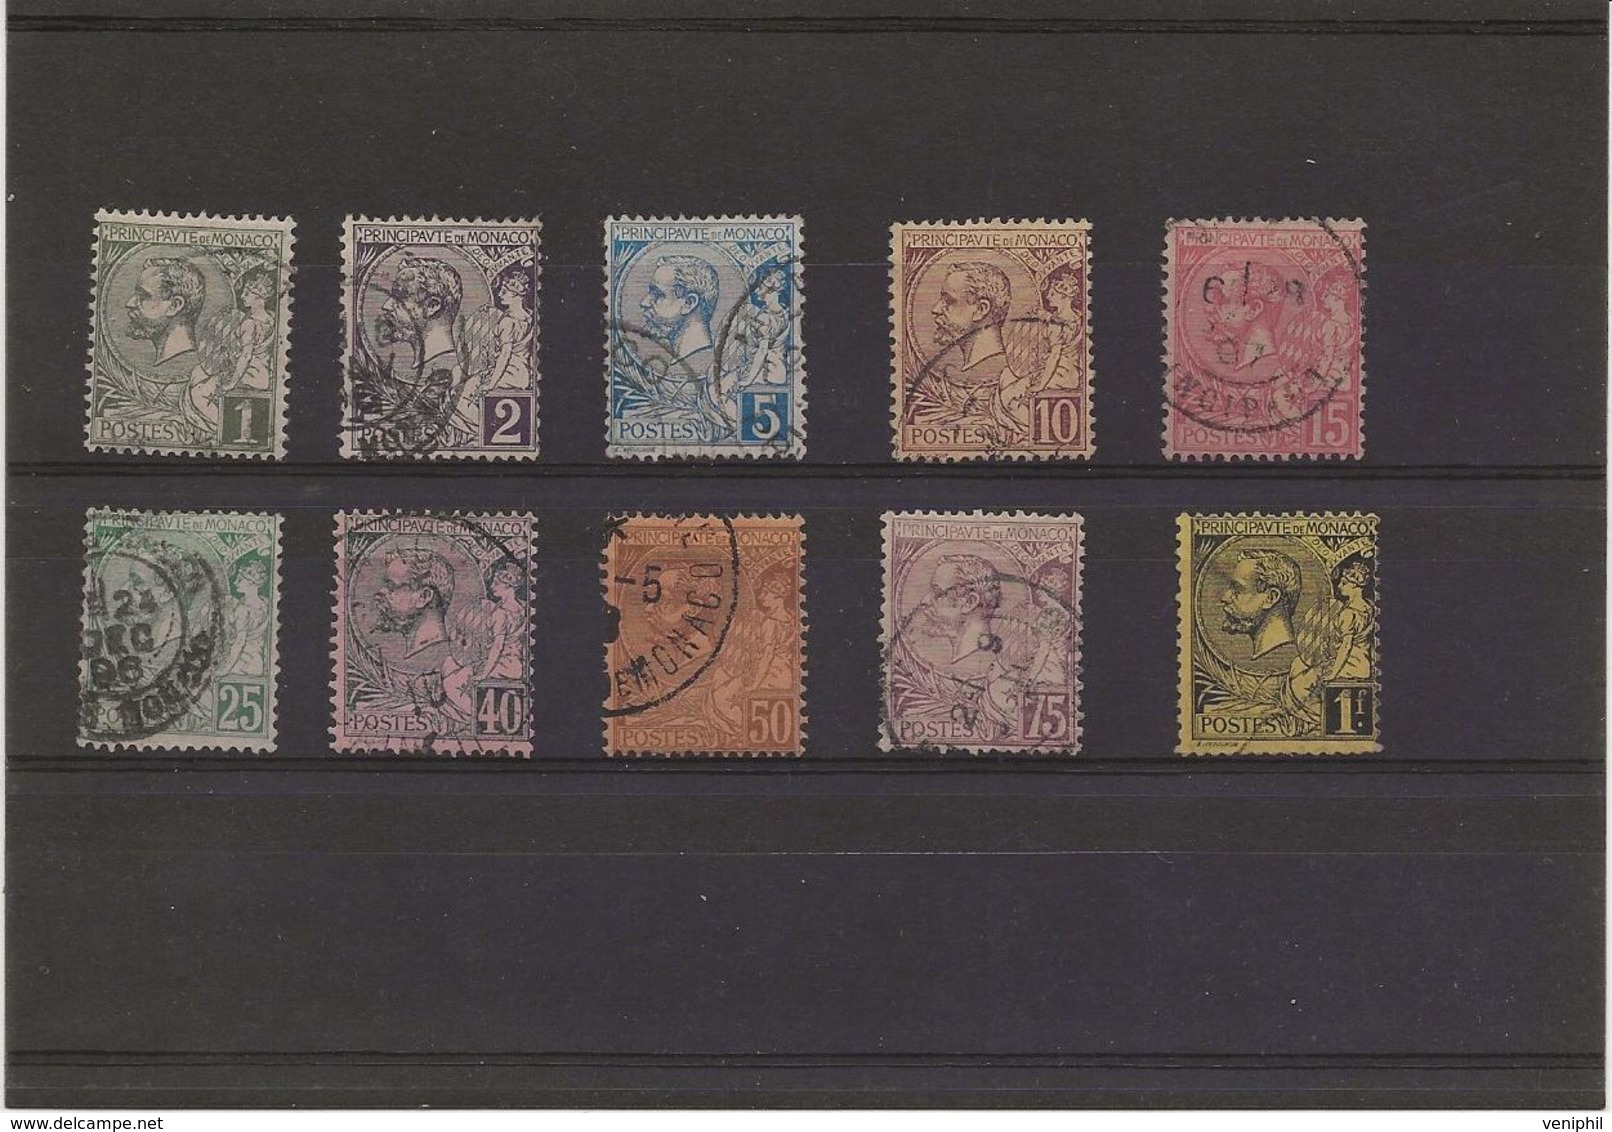 MONACO - TIMBRES N° 11 A 20 OBLITERES -TB - ANNEE 1891-94 - COTE 126 € - Used Stamps